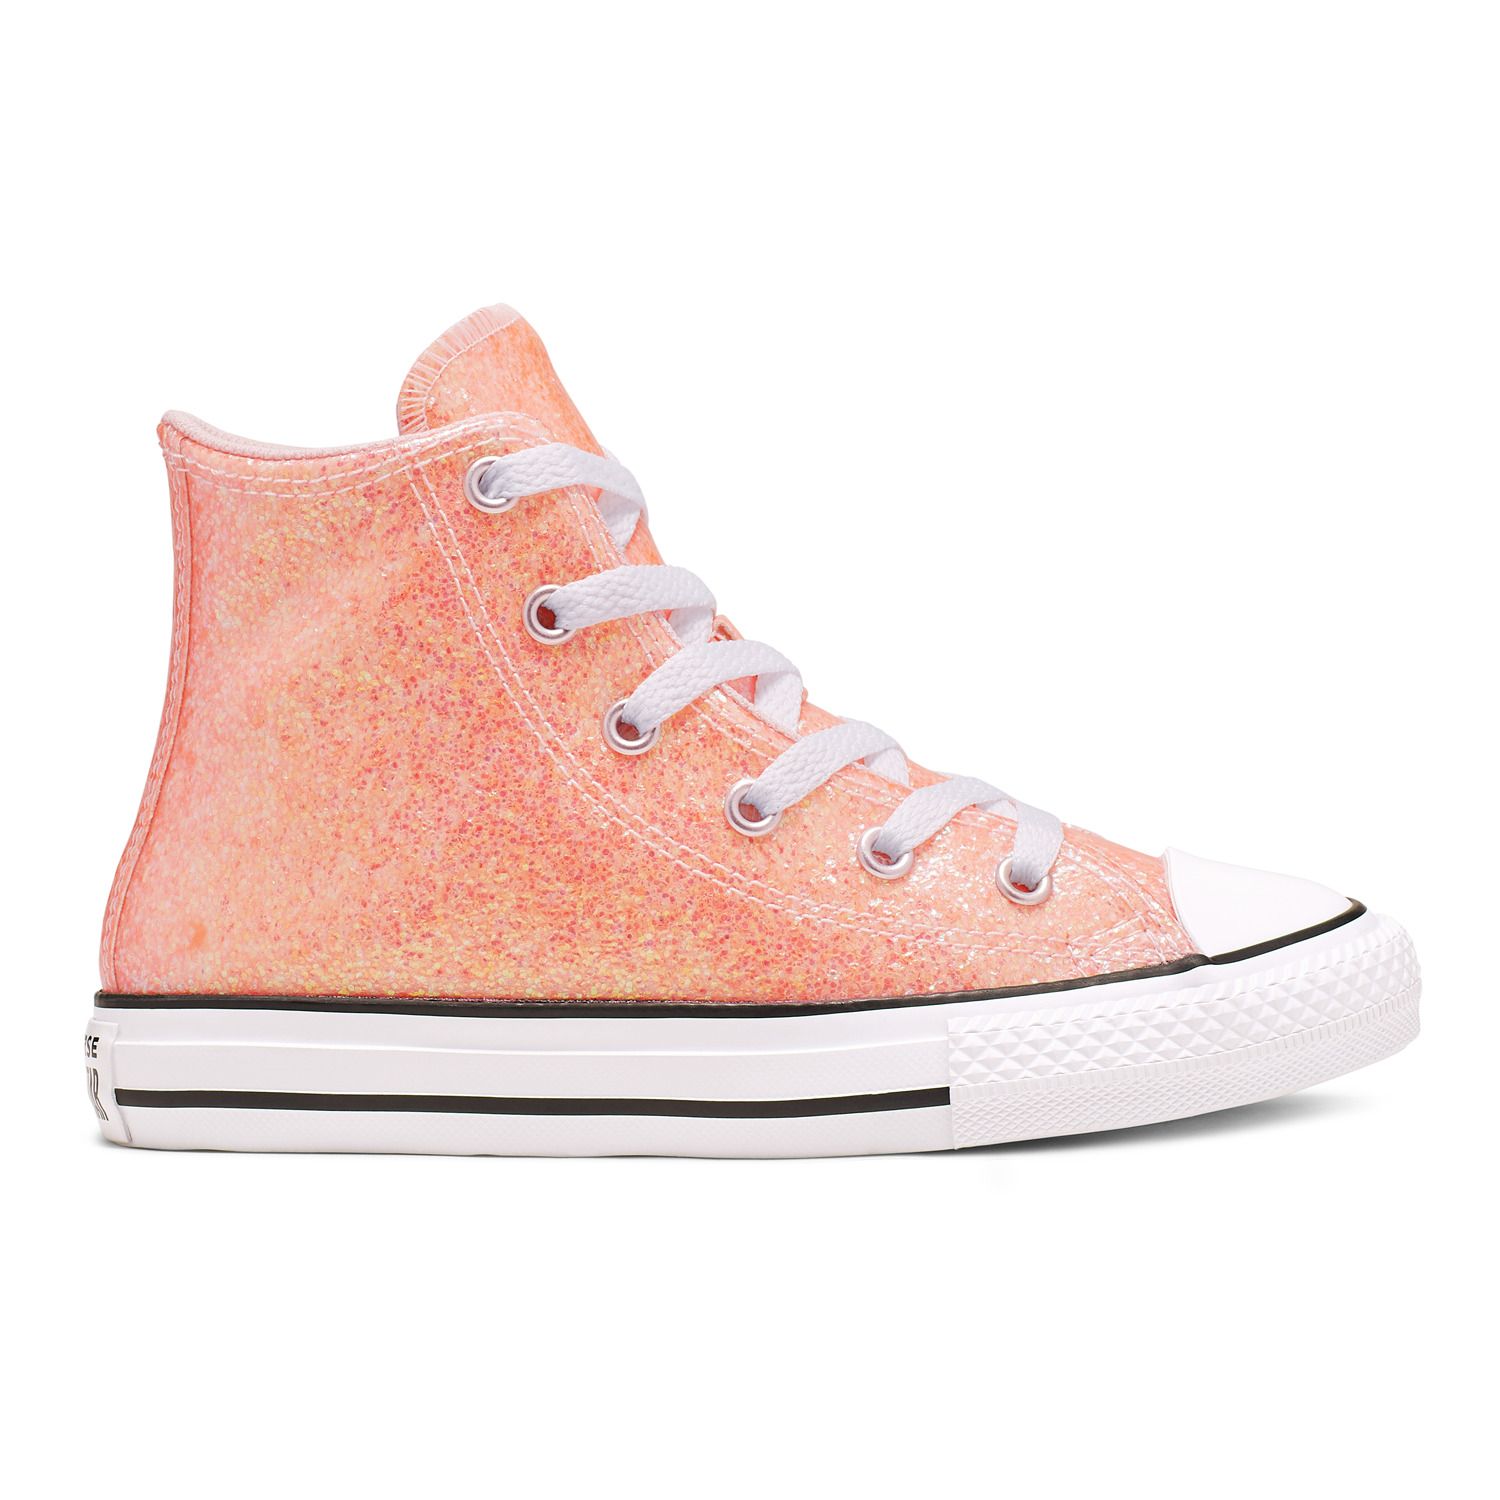 pink sparkly high top converse